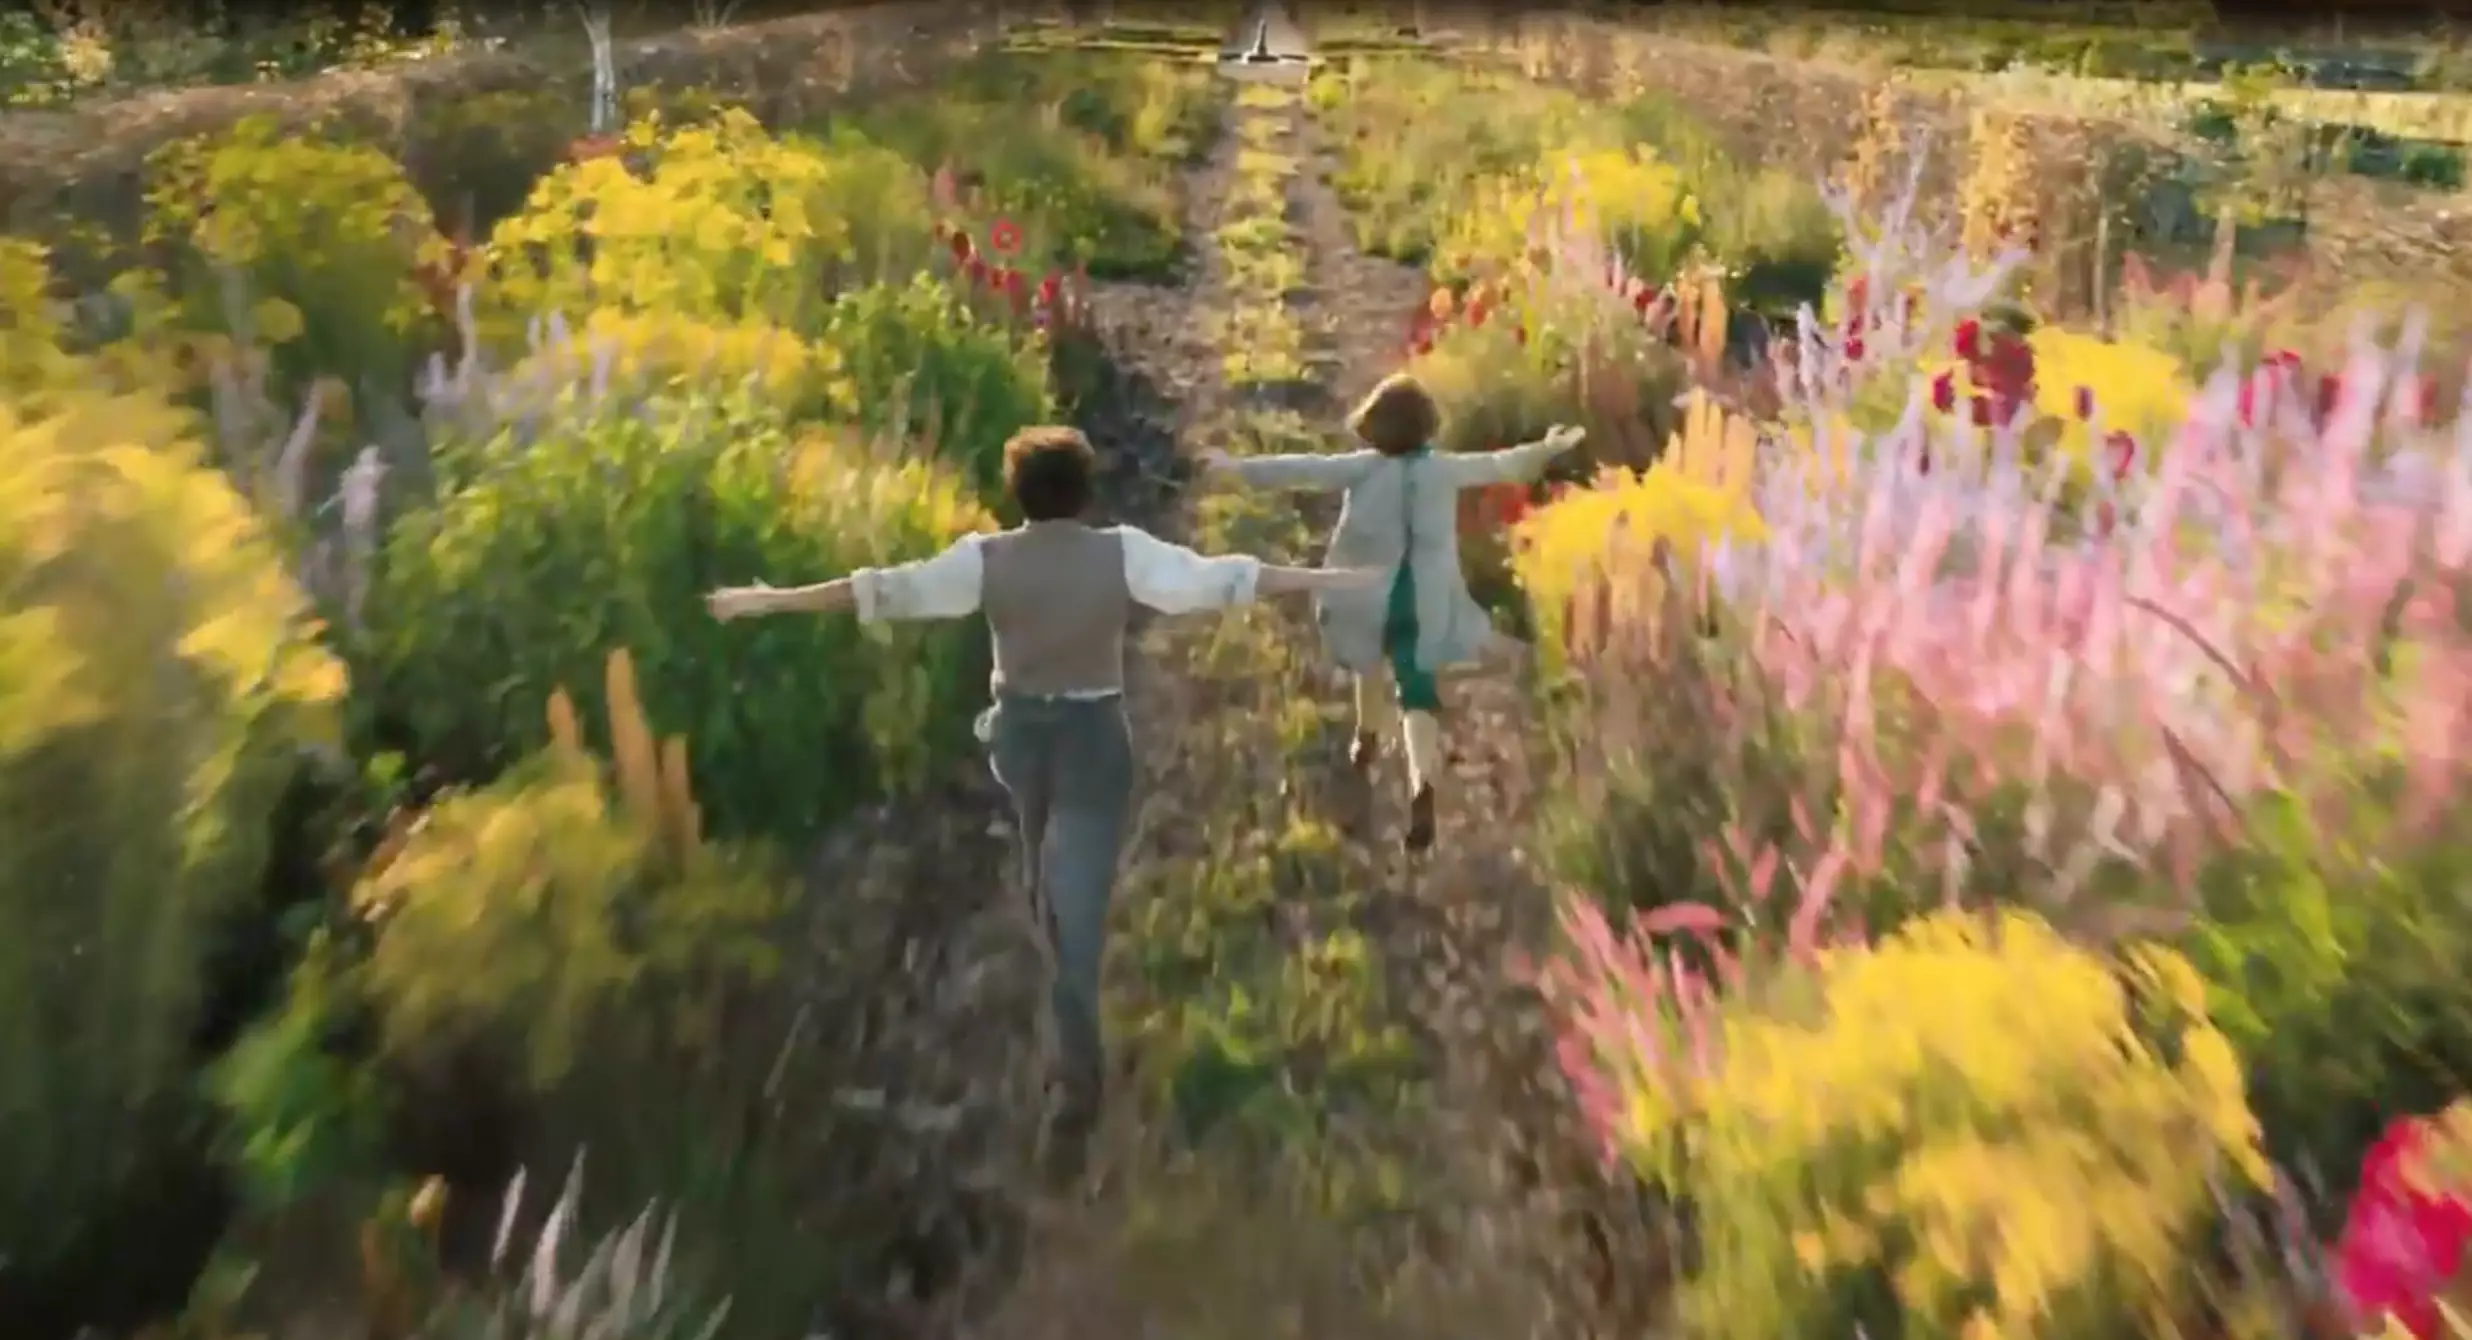 The remake will no doubt do the garden justice thanks to new TV technology.